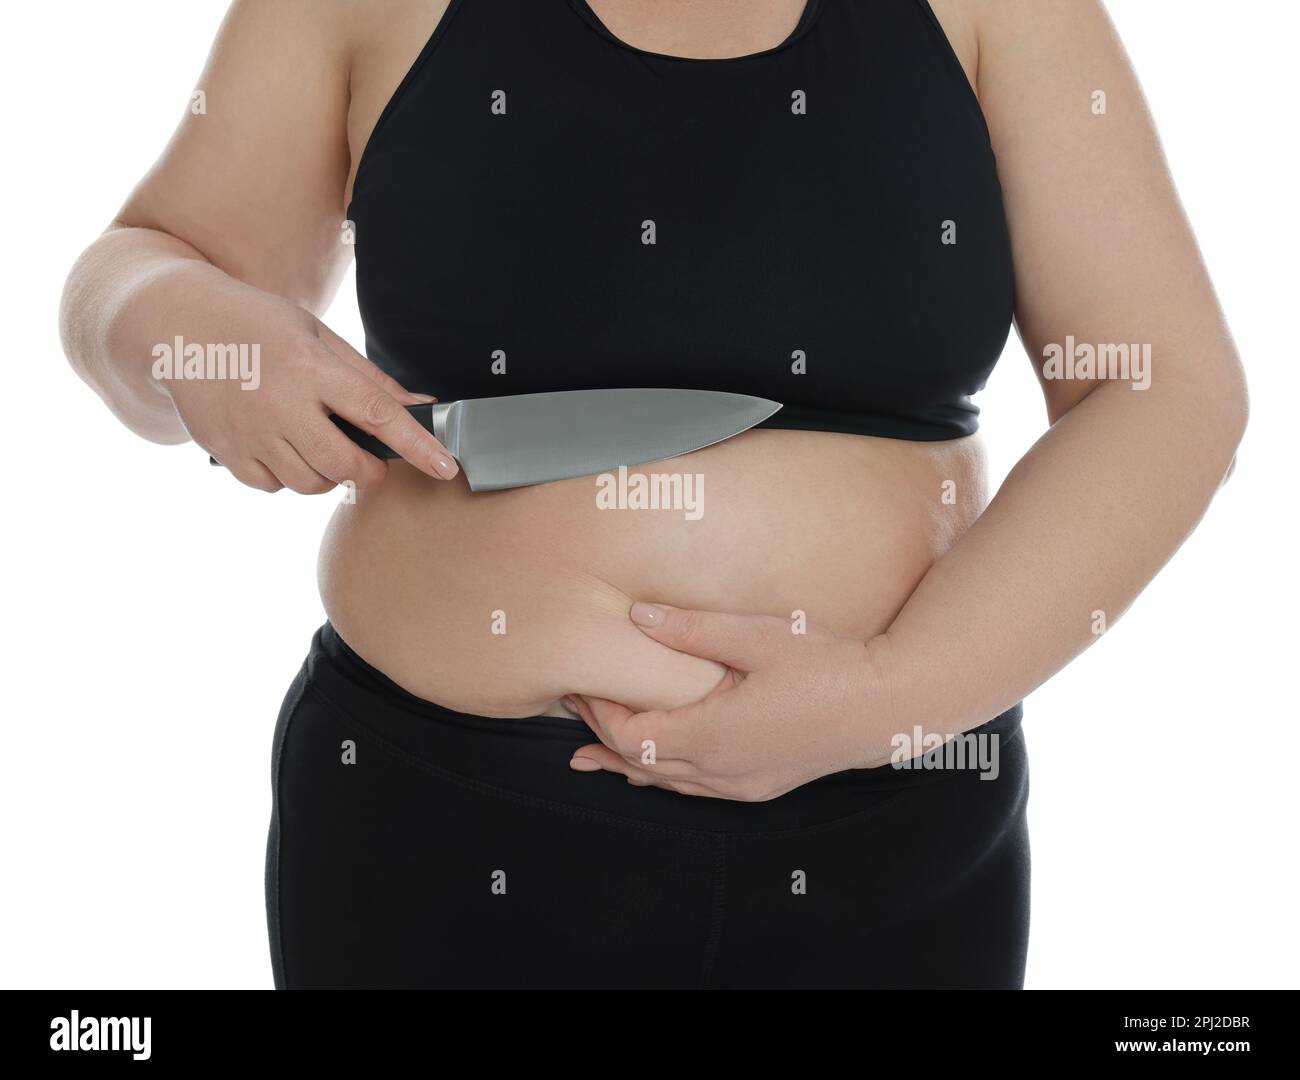 Obese woman with flabby arm on white background. Weight loss